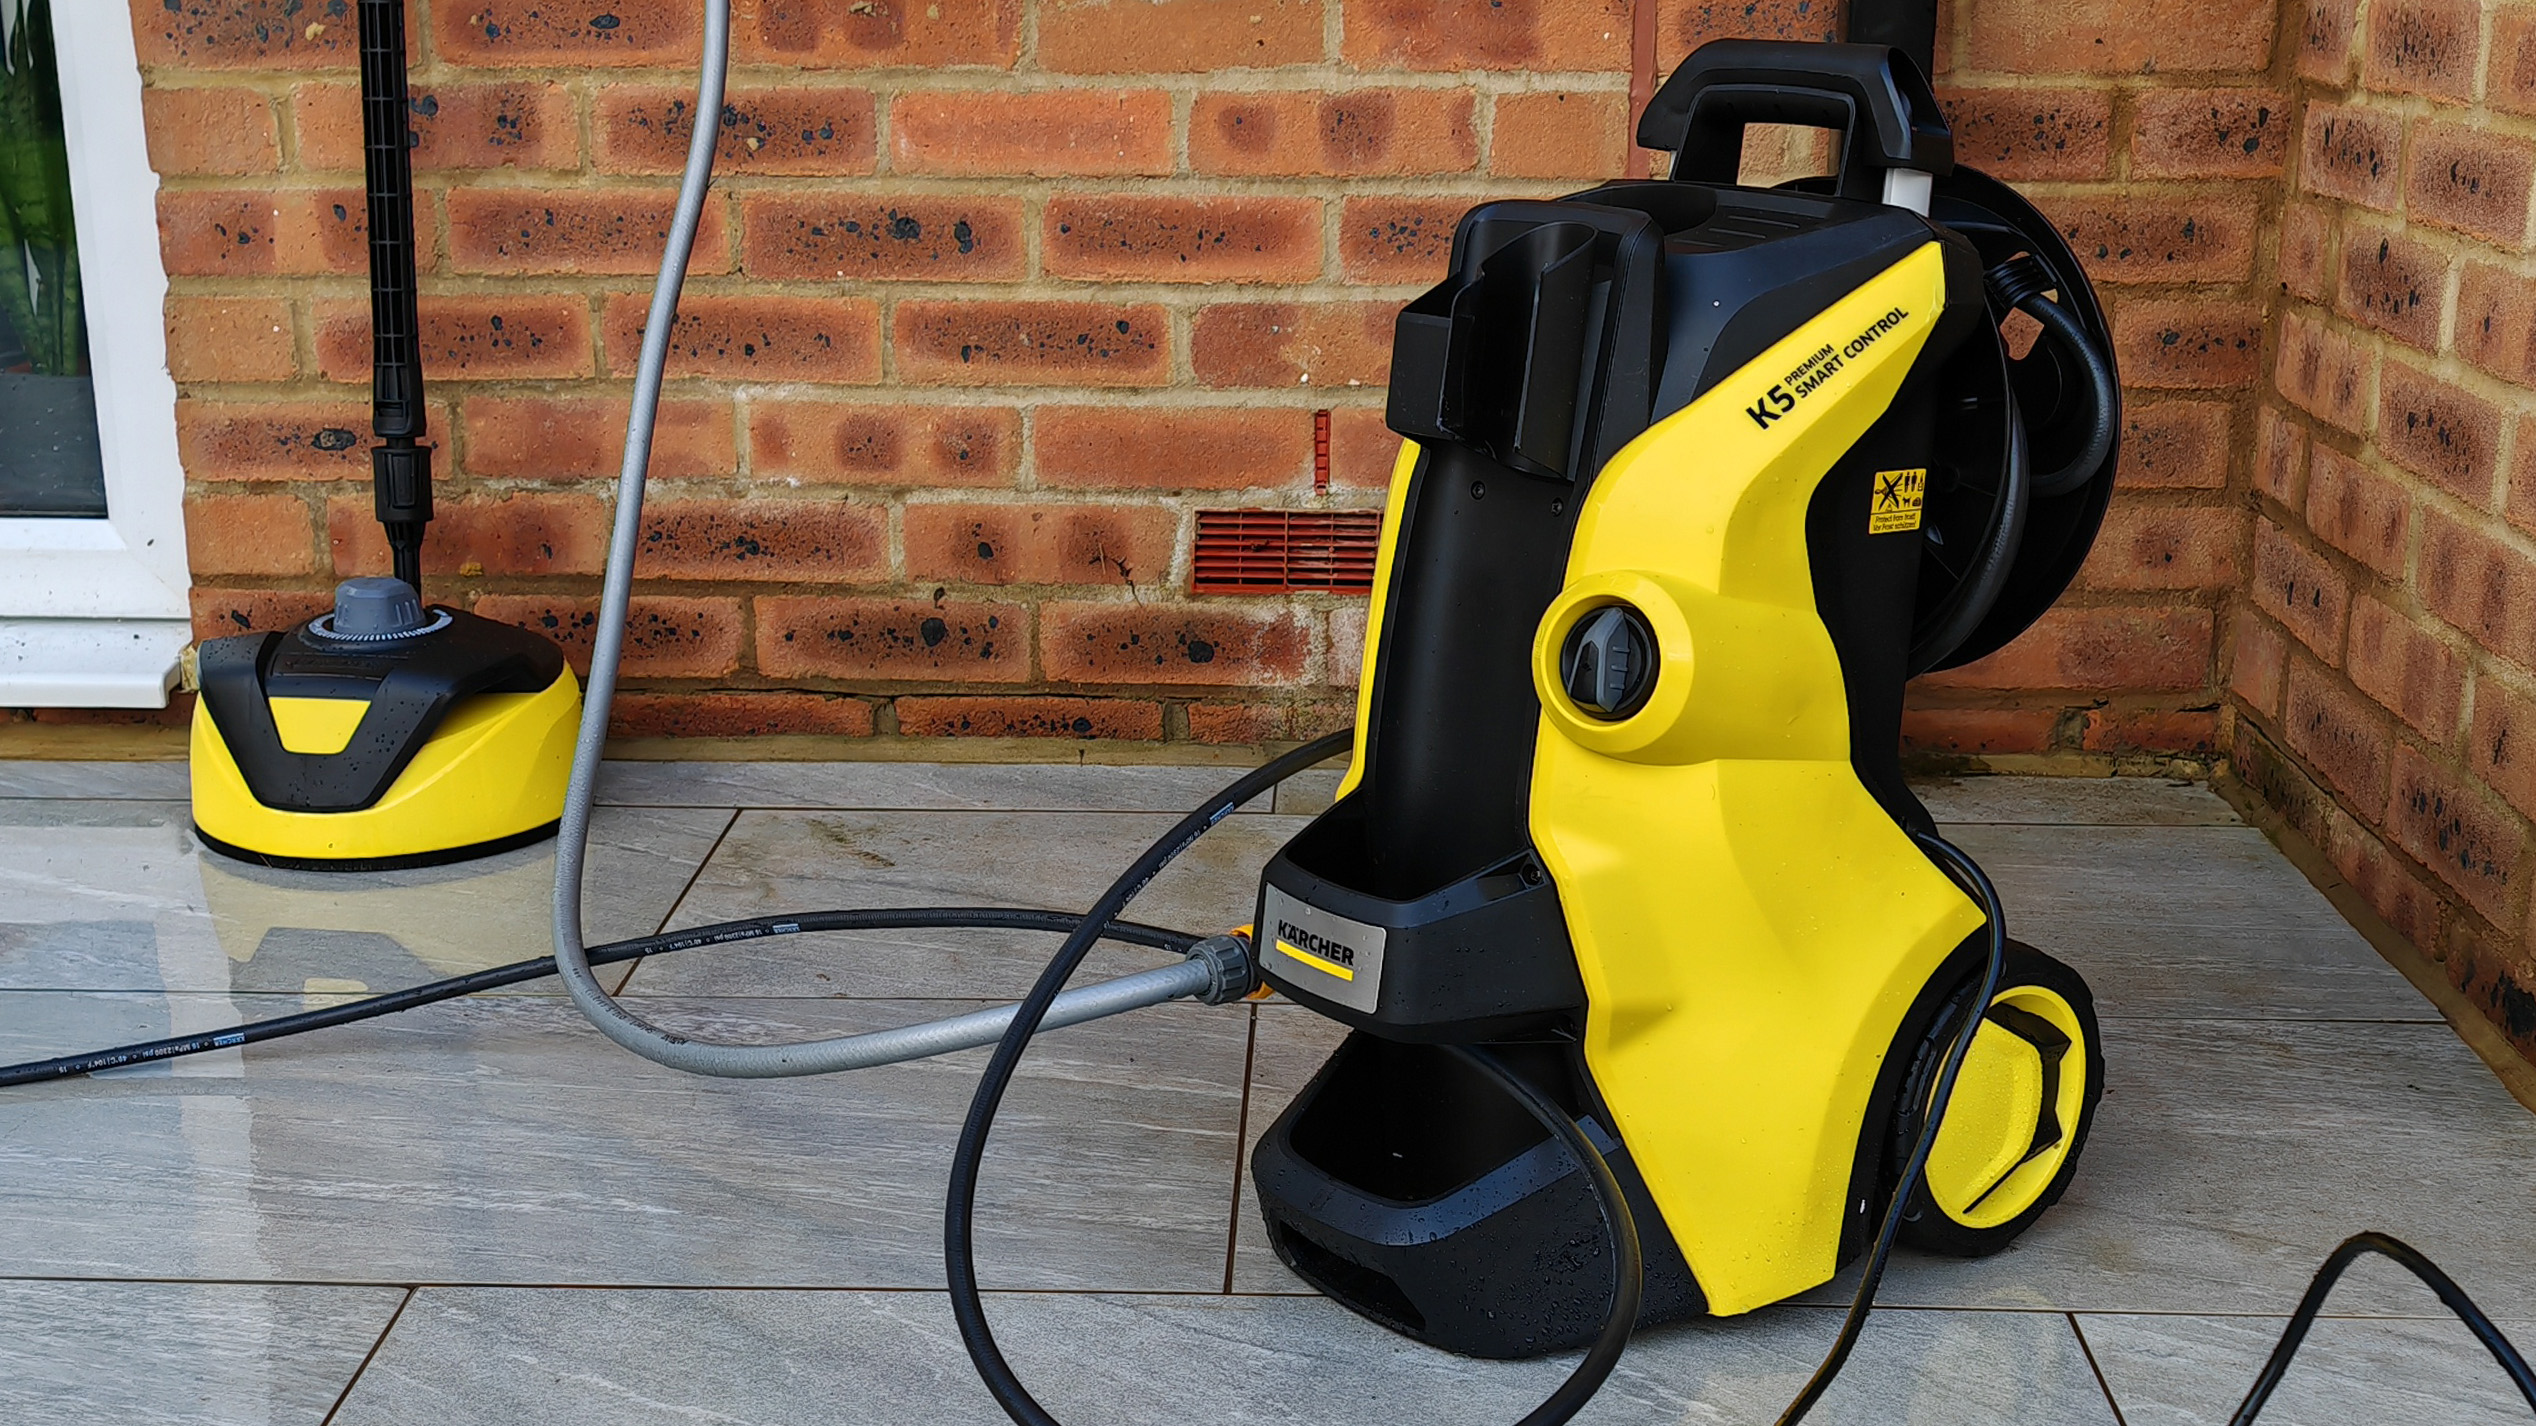 I tried a Karcher pressure washer – it's a patio-cleaning dream